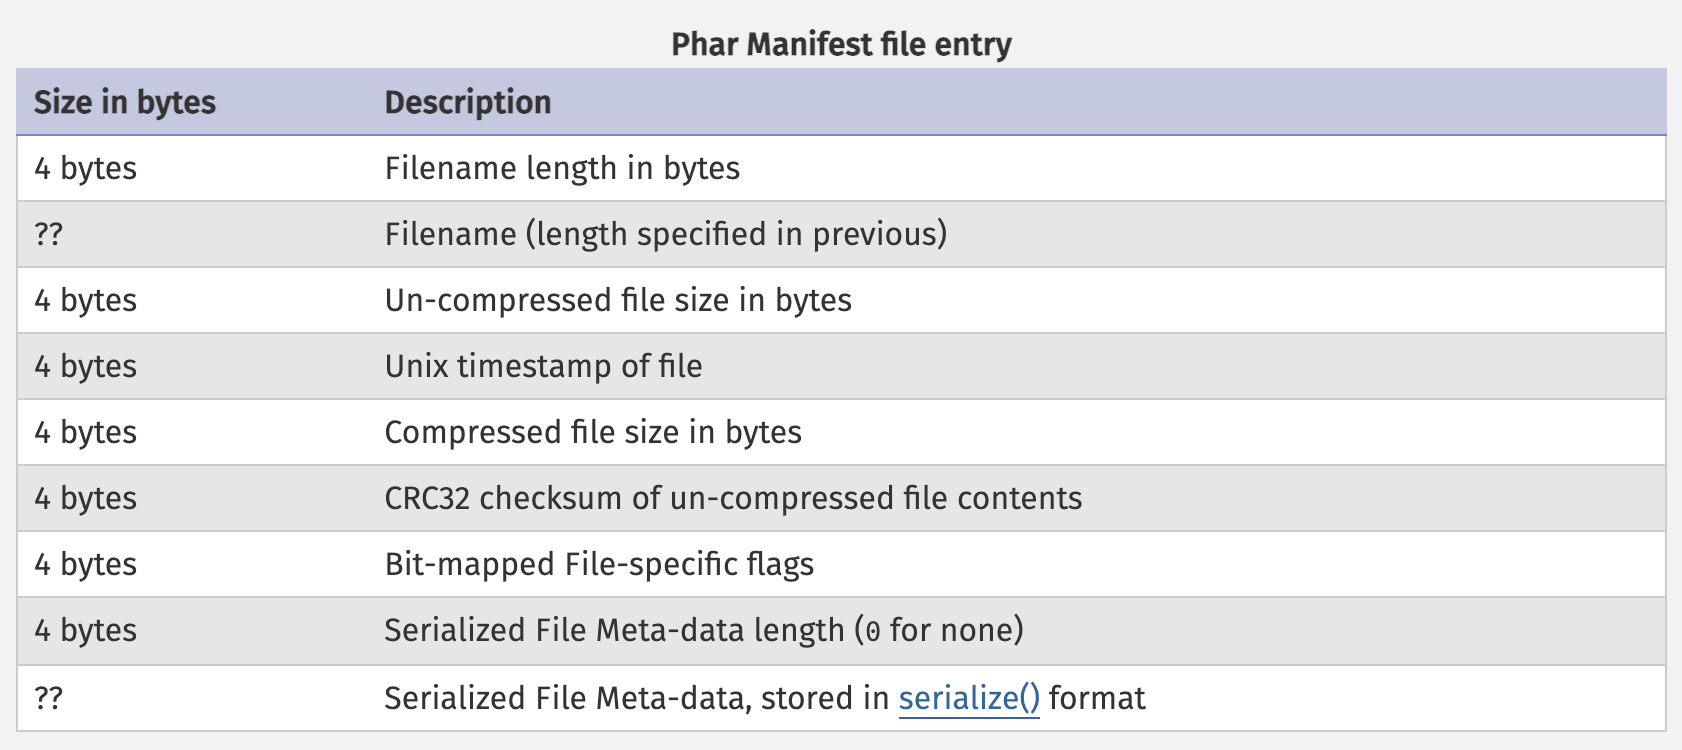 A table with the phar file manifest